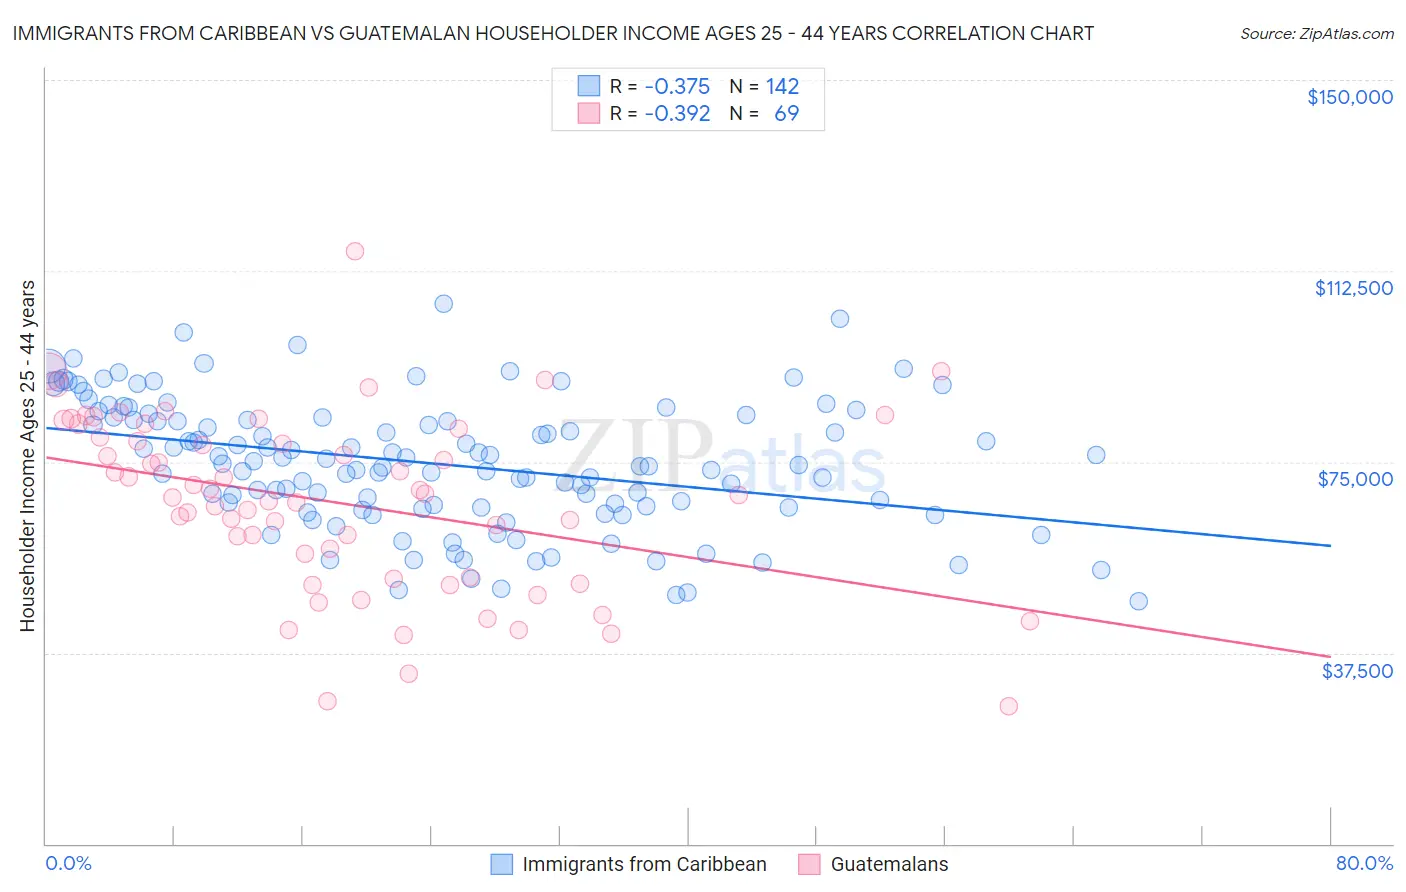 Immigrants from Caribbean vs Guatemalan Householder Income Ages 25 - 44 years